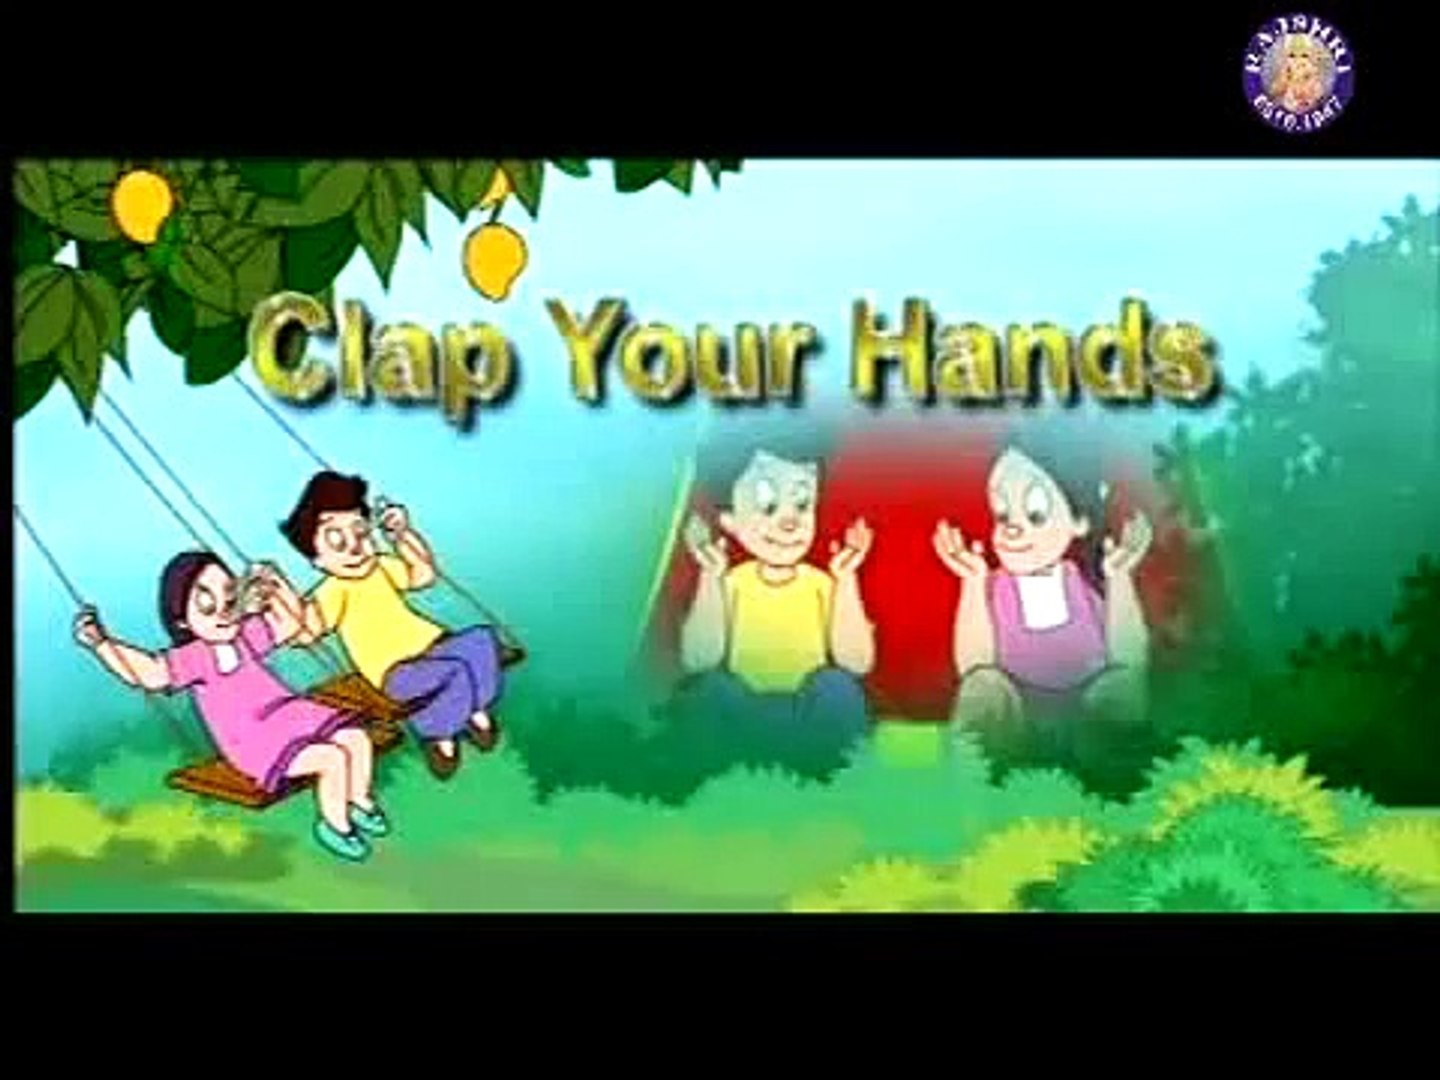 Babies Nursery Poem Clap Your Hands with lyrics (HD) - Dailymotion Video